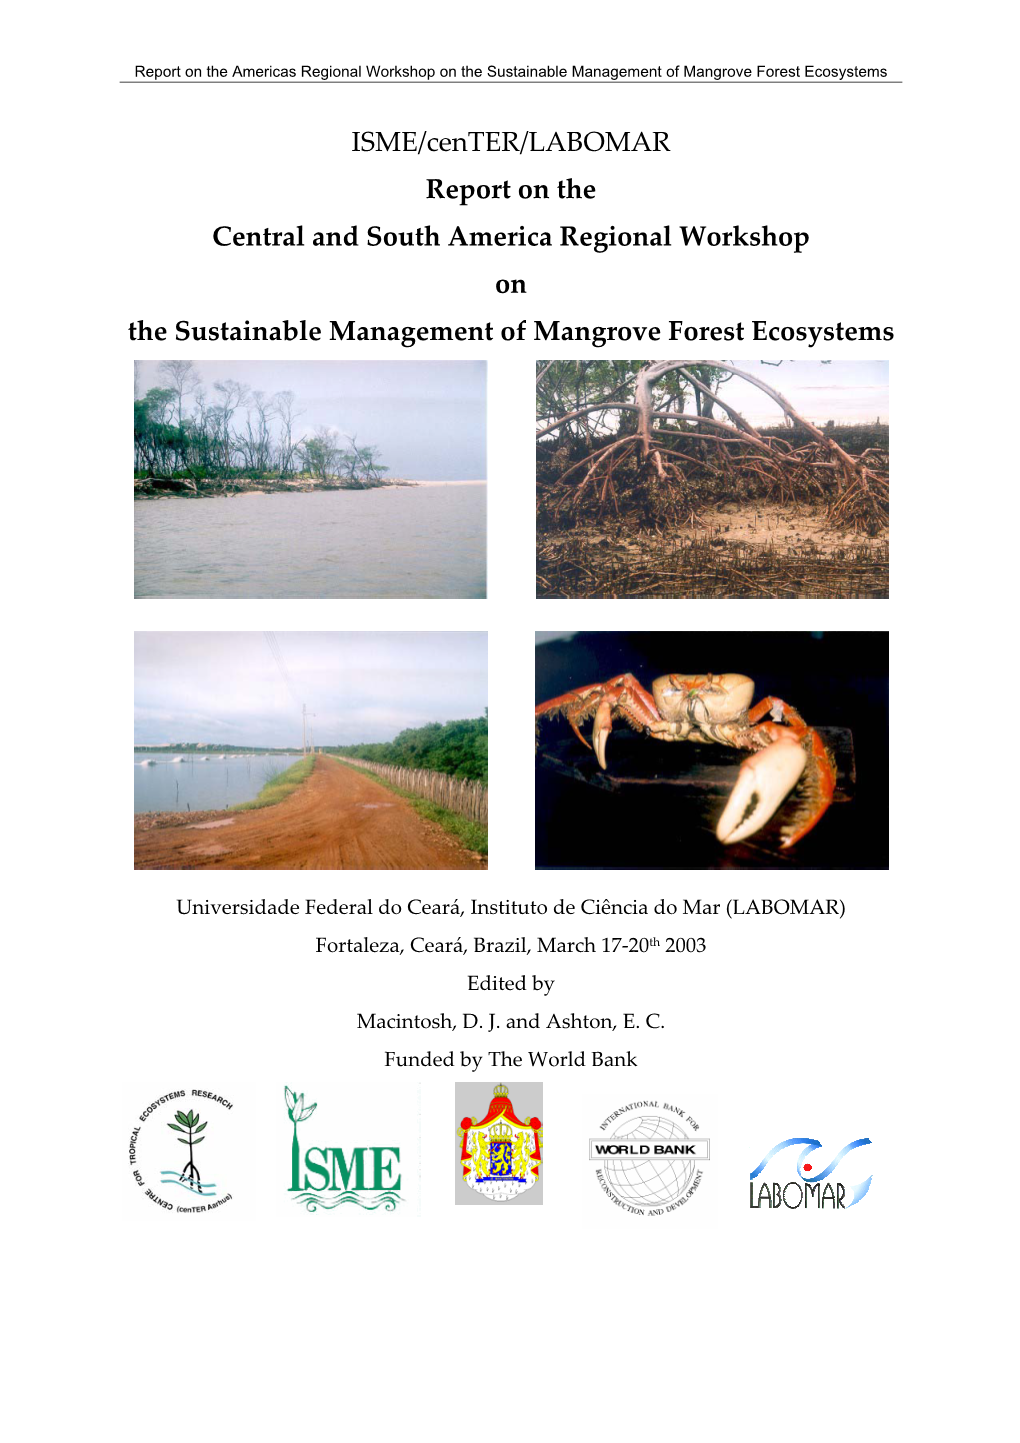 ISME/Center/LABOMAR Report on the Central and South America Regional Workshop on the Sustainable Management of Mangrove Forest Ecosystems